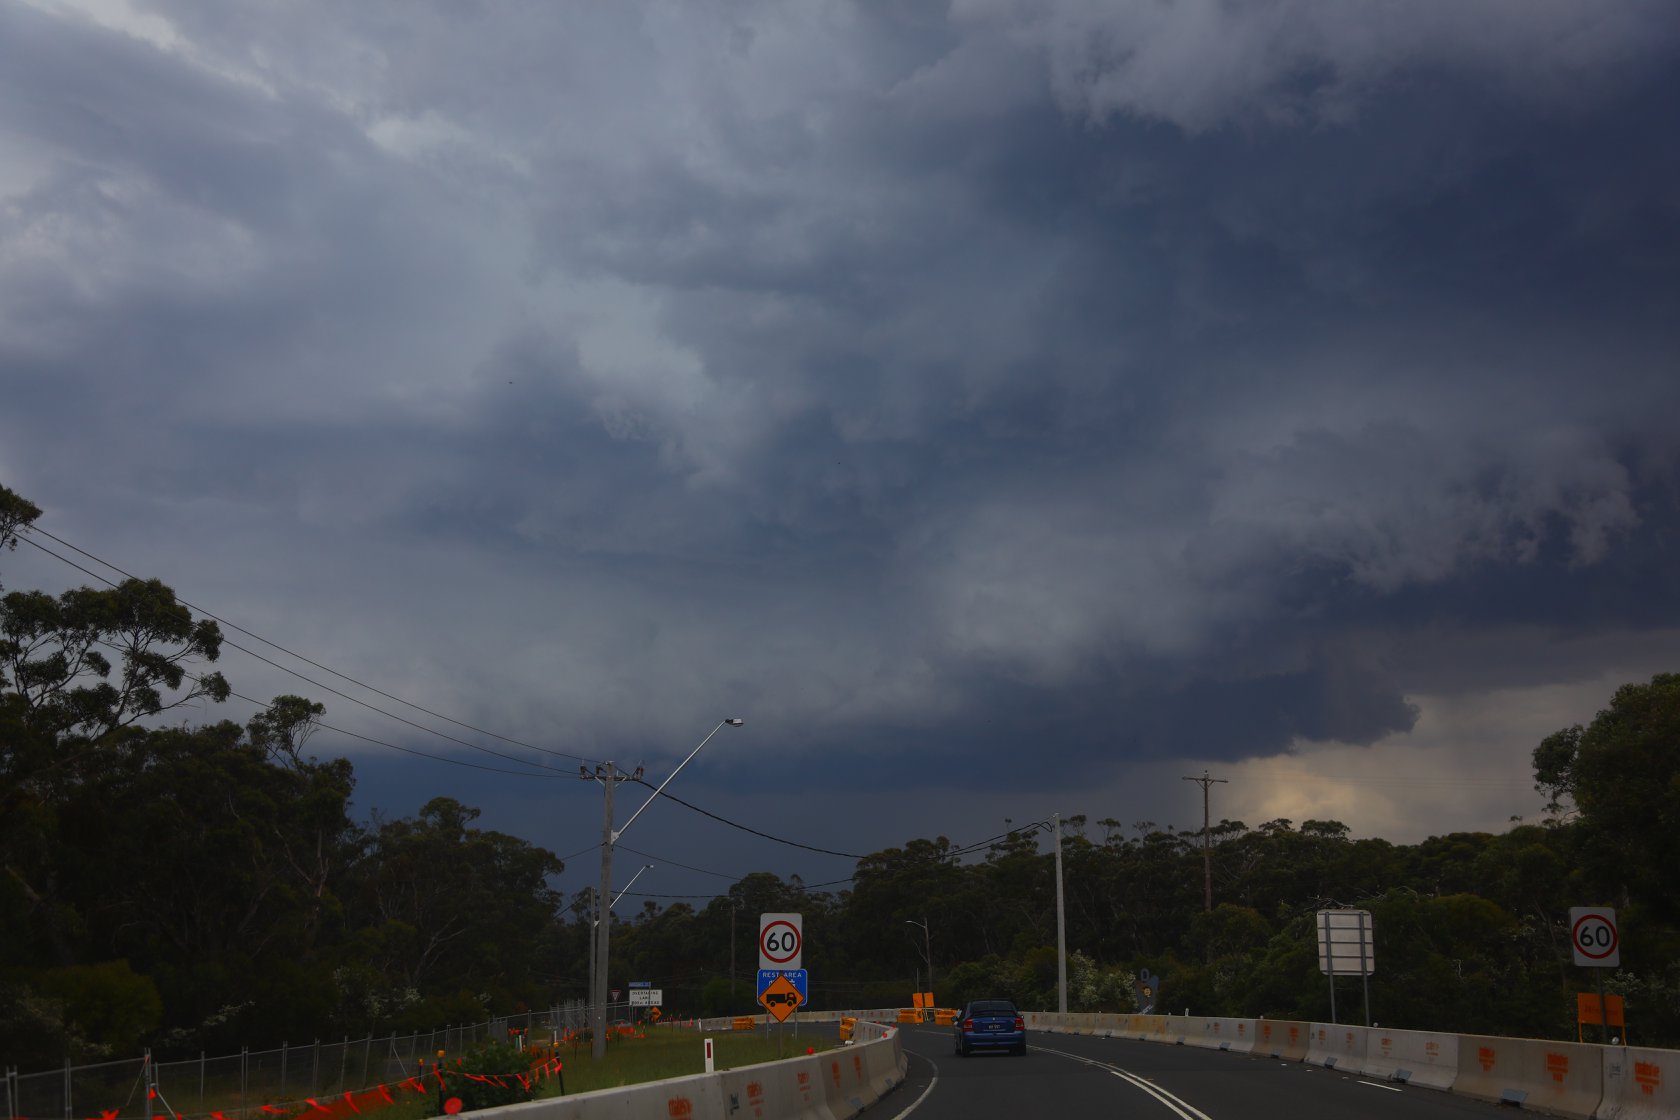 This was a nice surprise and went supercell as it hit near Katoomba and north towards Bell

Went for a storm chase to the Blue Mountains and litereall...